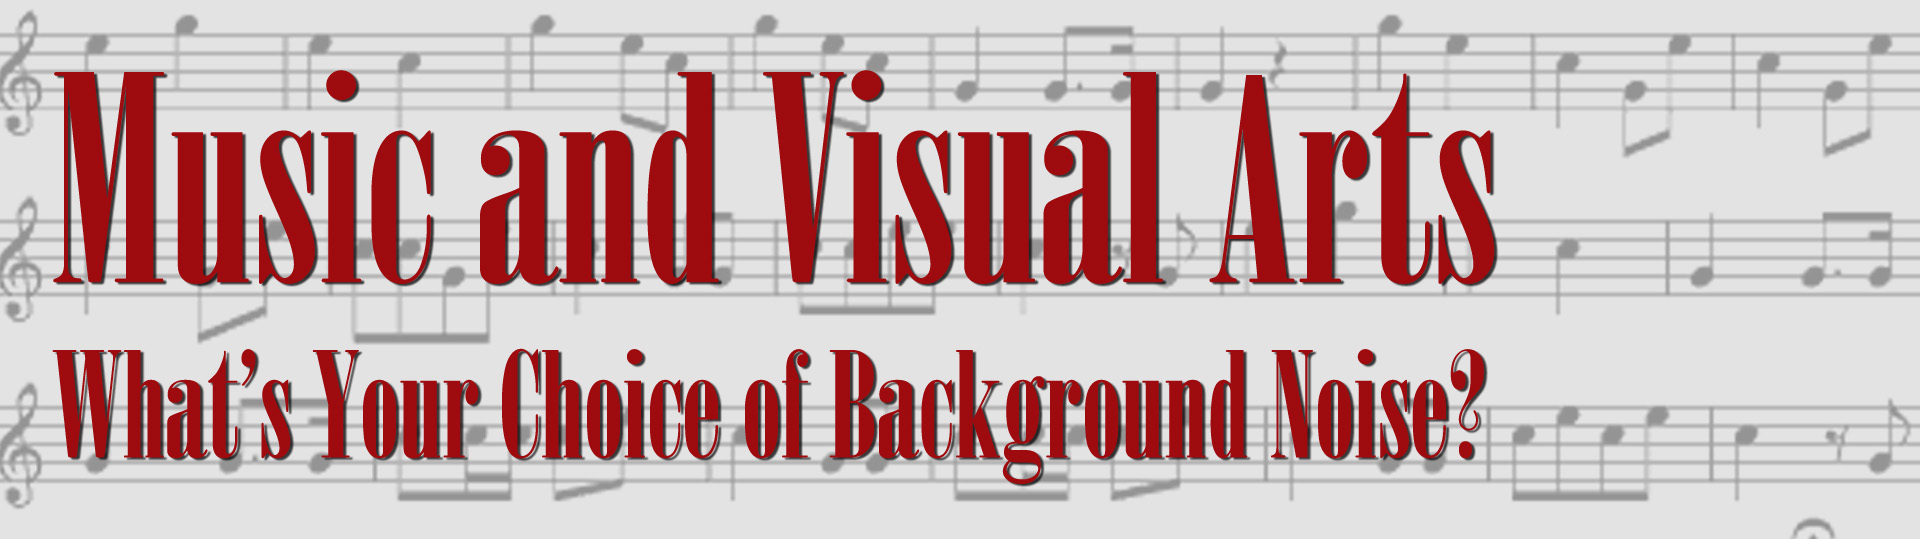 Music and Visual Artists